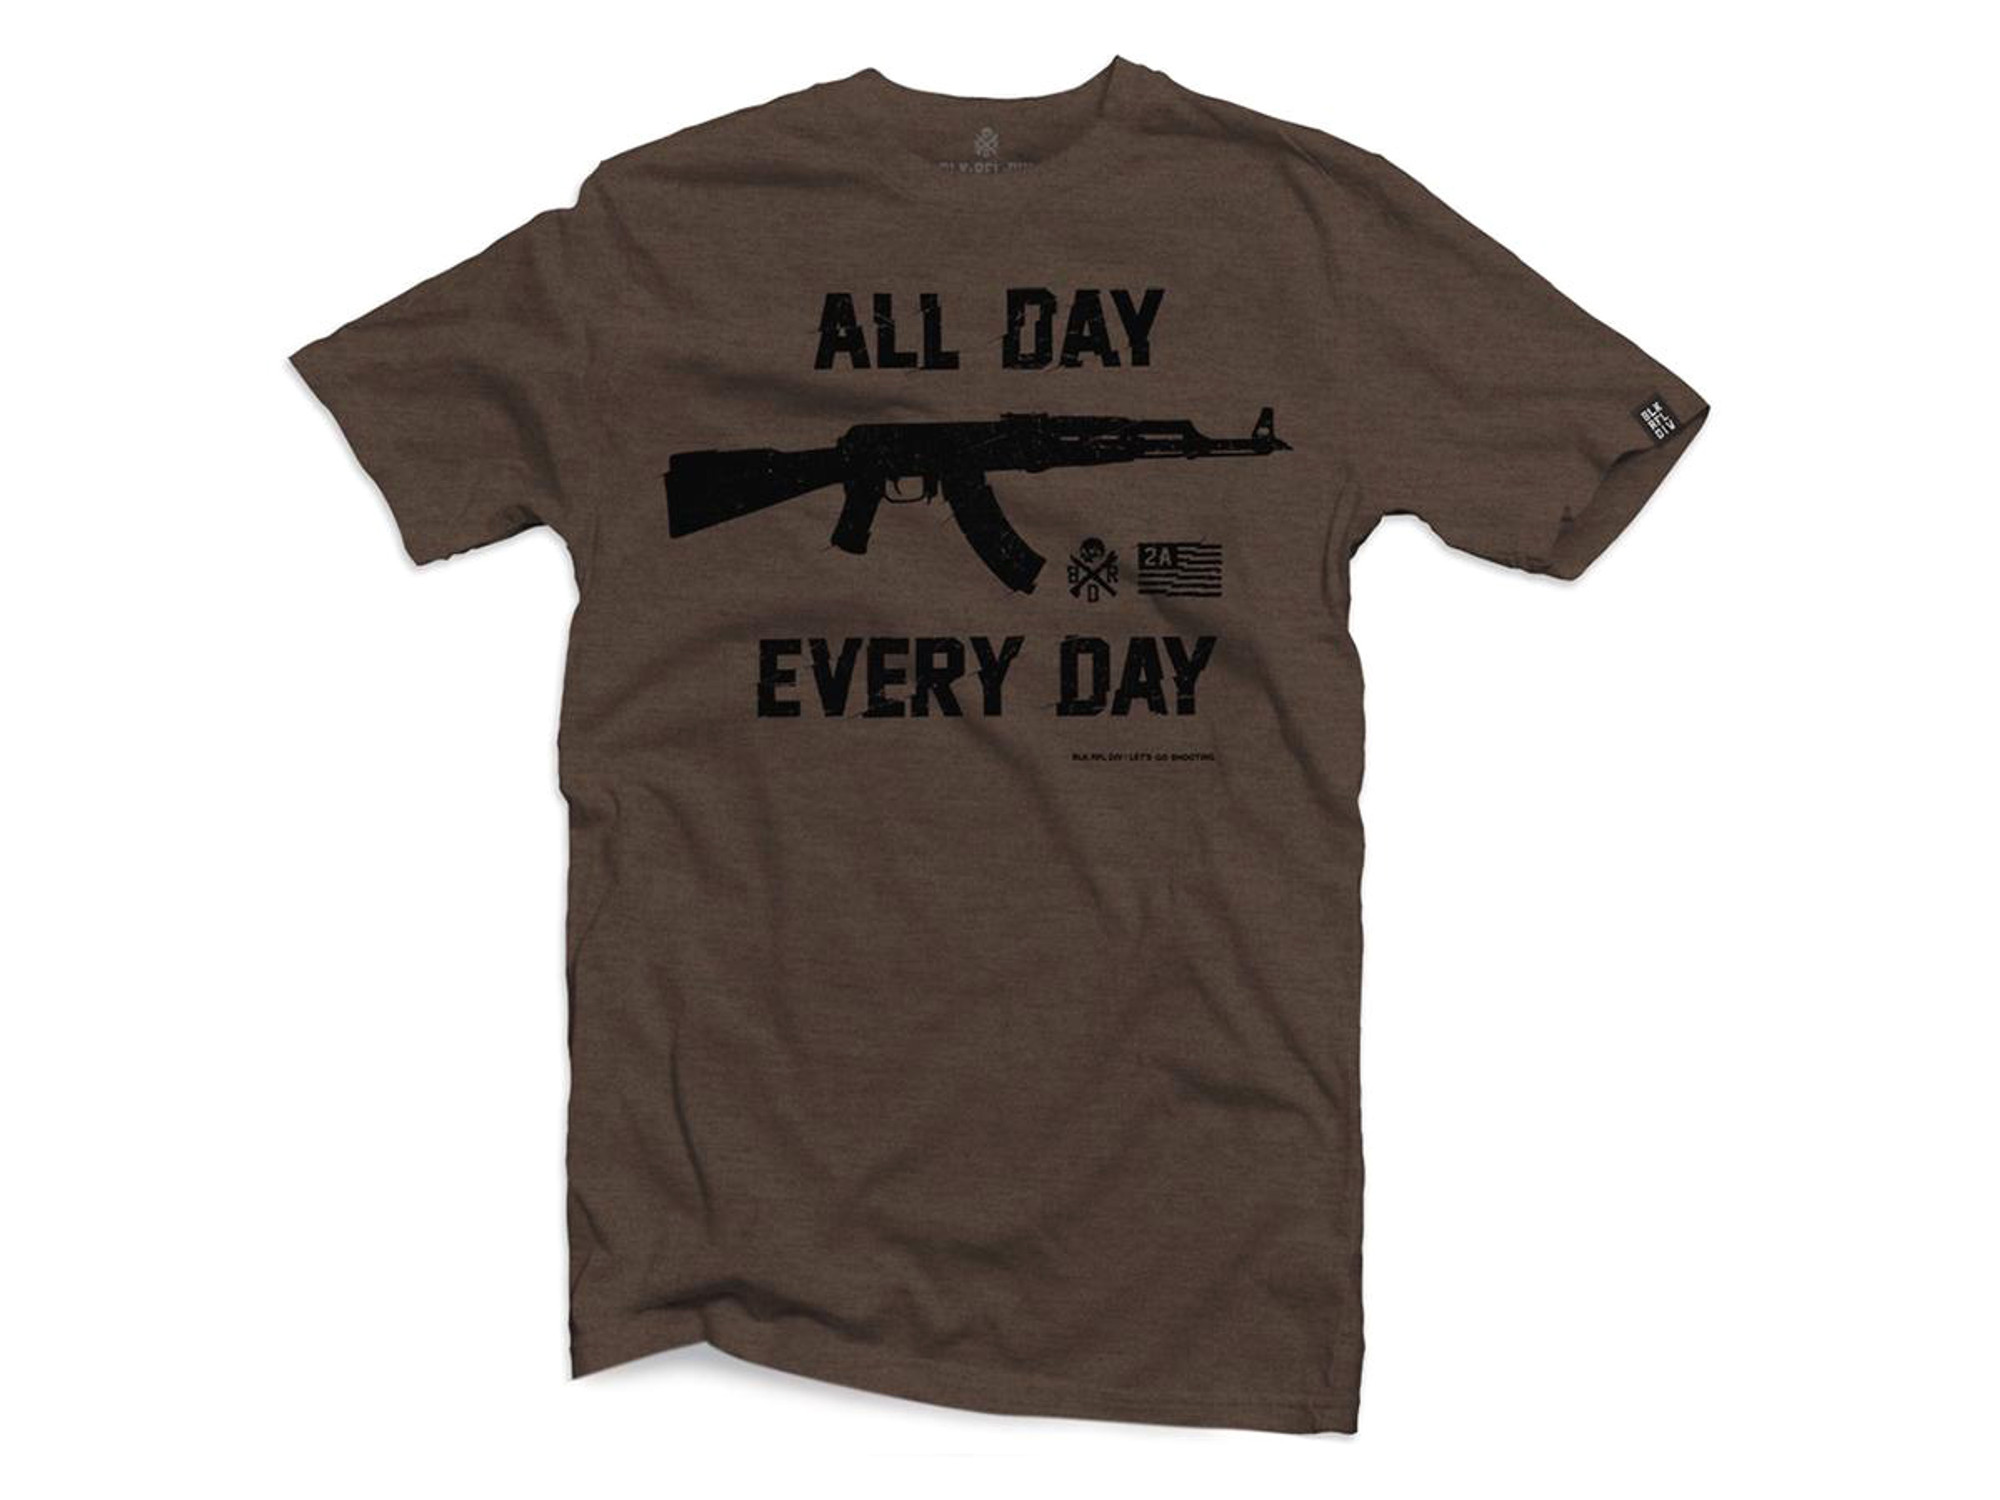 Black Rifle Division "AK All Day Every Day" Graphic Tee - Brown Heather